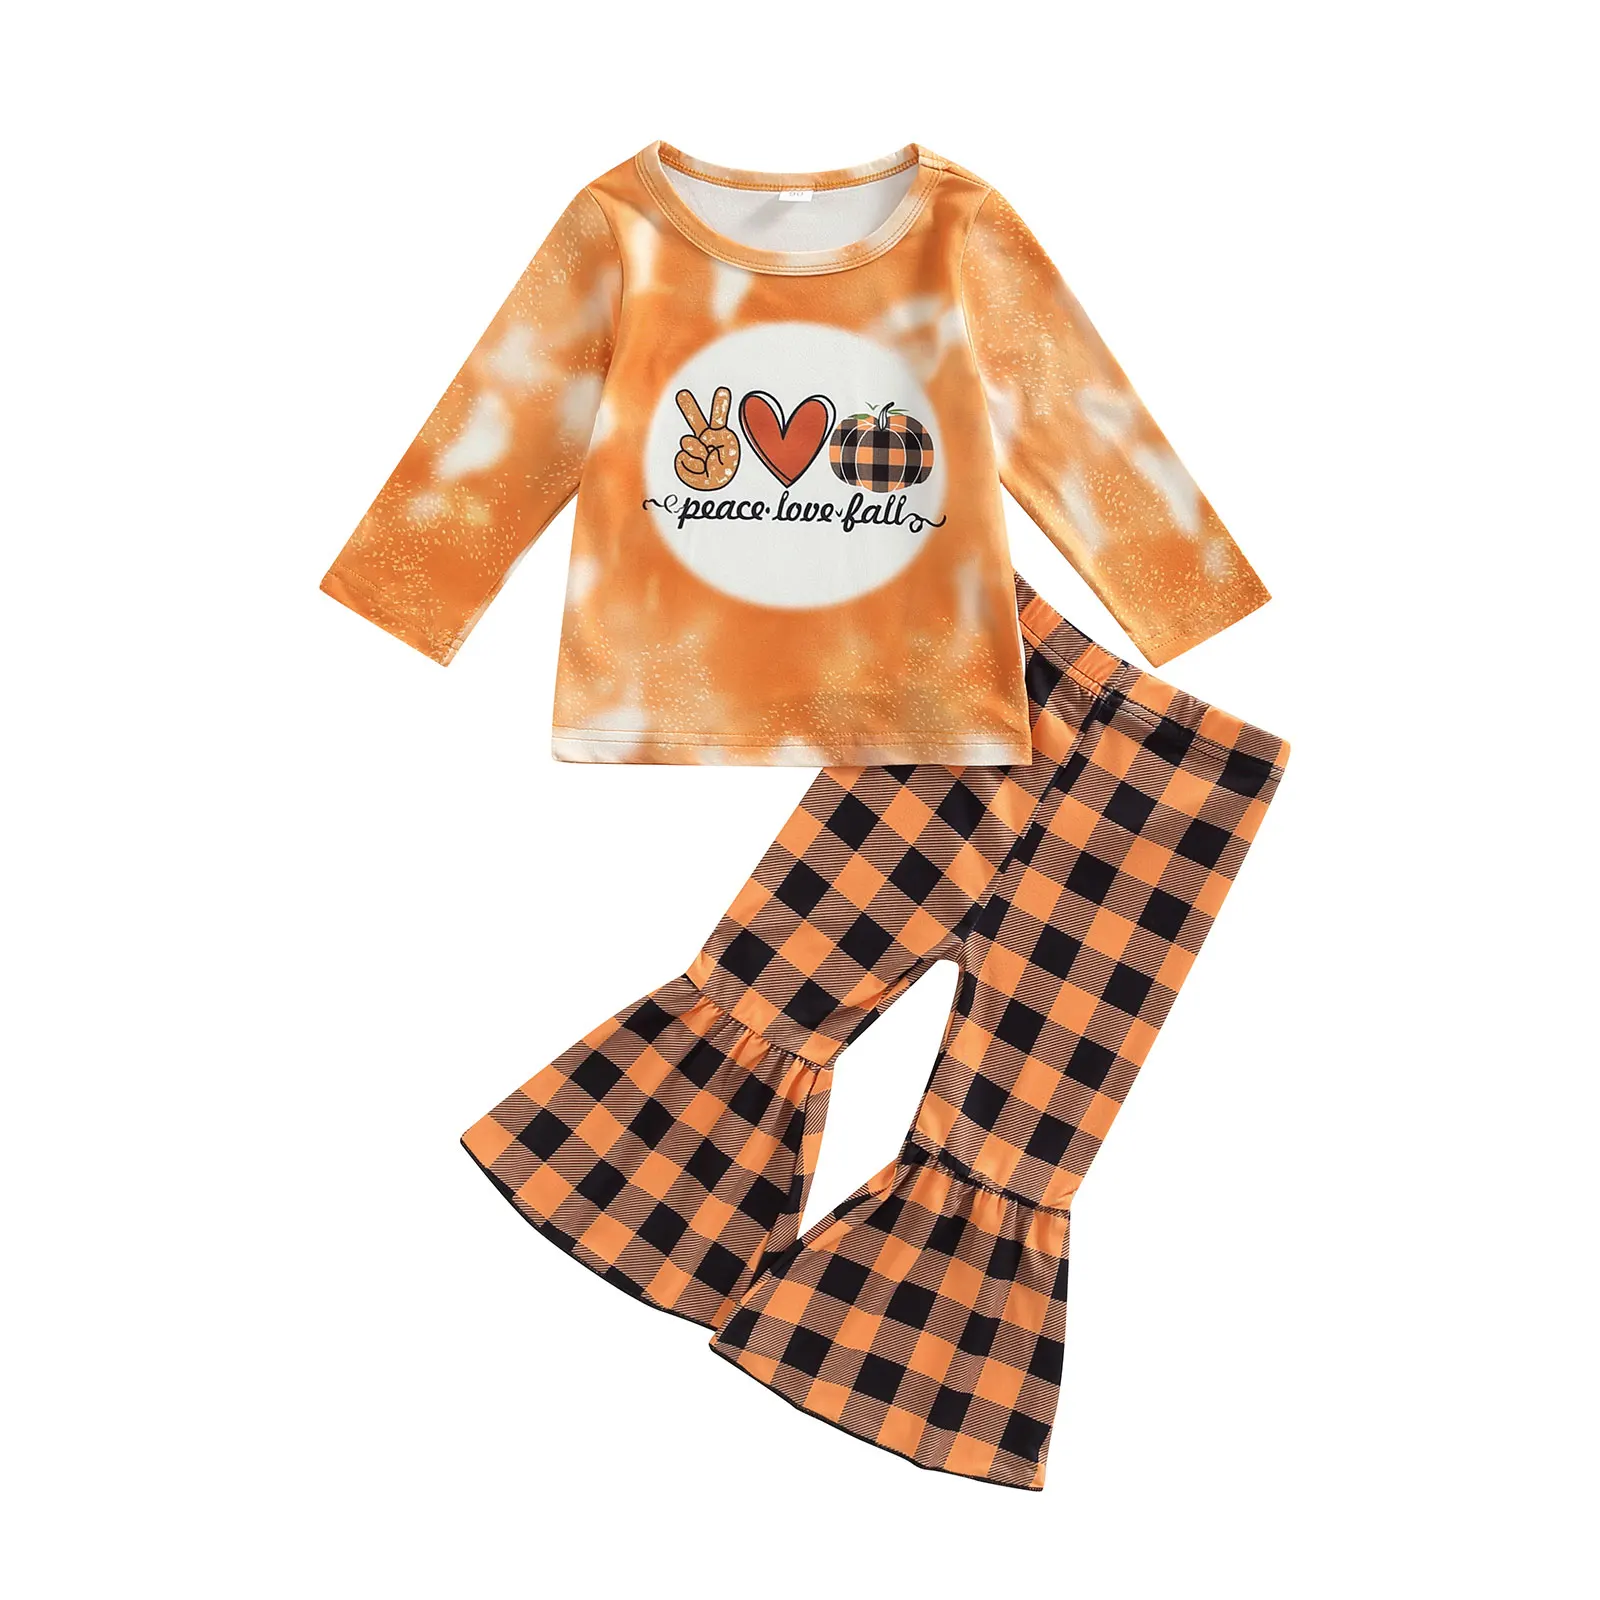 2022-06-10 Lioraitiin 1-6Years Toddler Girls Halloween 2Pcs Outfit Sets Long Sleeve Pumpkin Print Tie Dye Tops Plaid Flared Pant